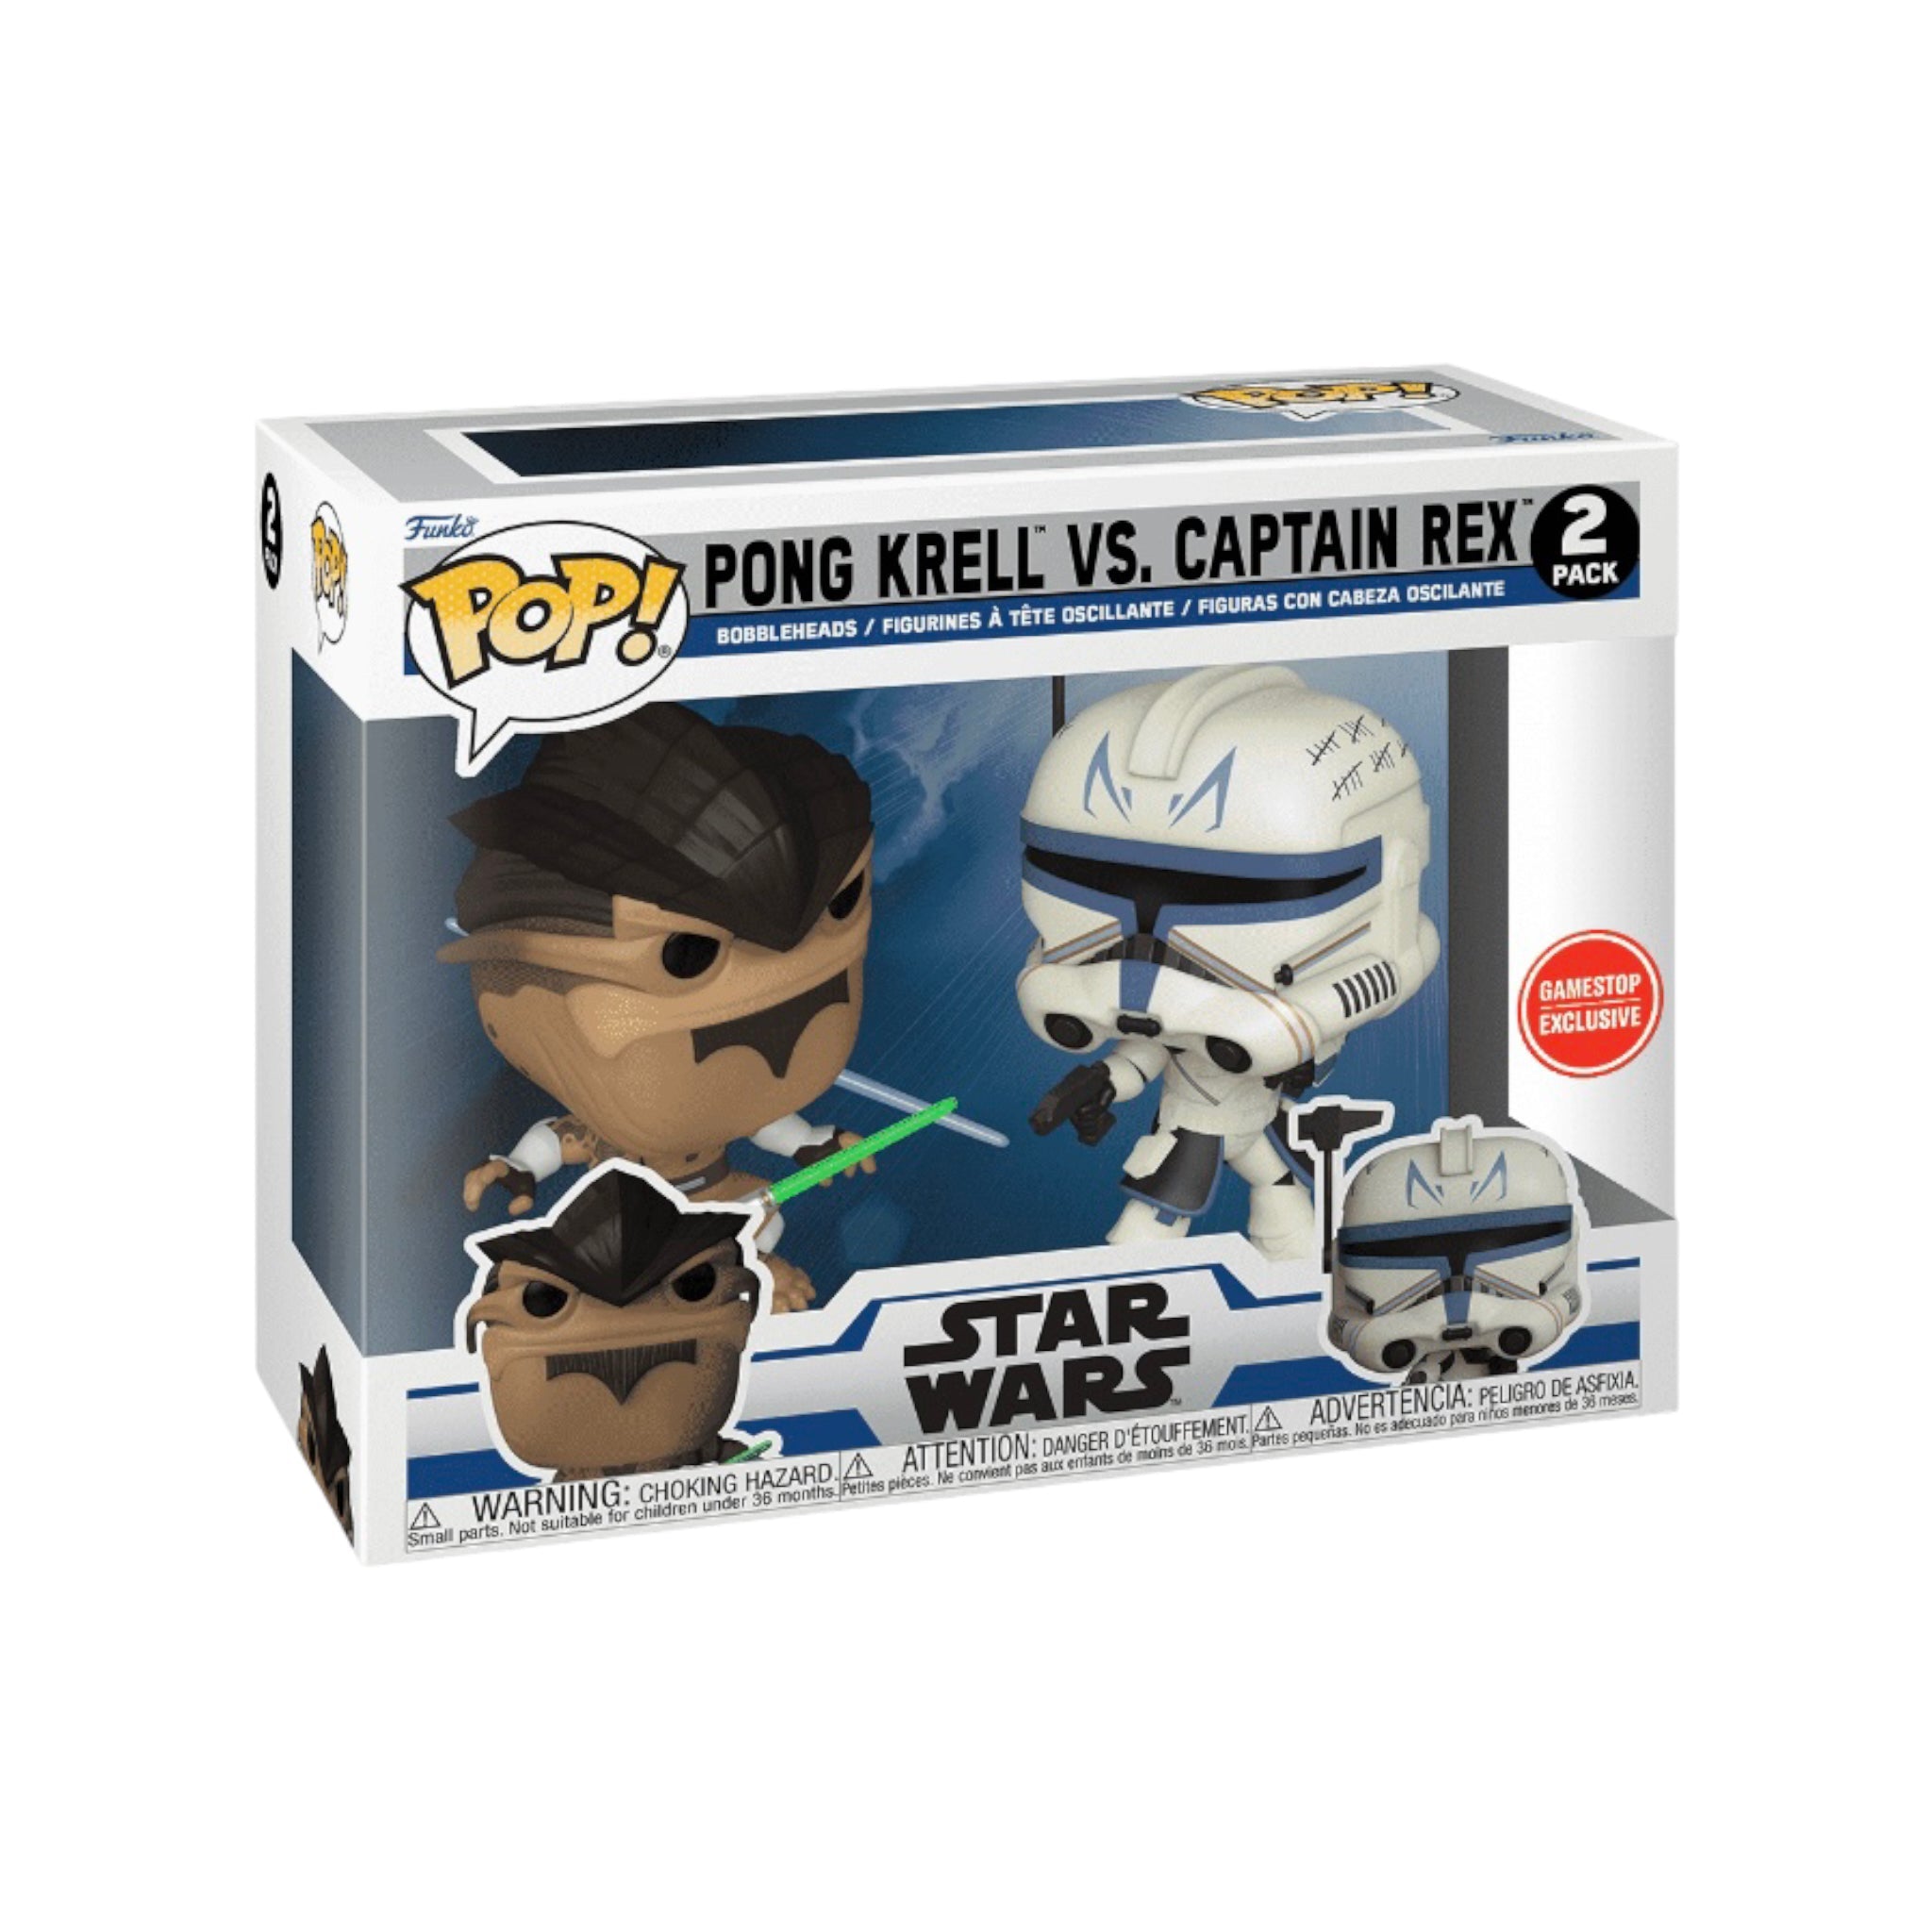 Pong Krell Vs. Captain Rex 2 Pack Funko Pop! - Star Wars: The Clone Wars - GameStop Exclusive - Condition 8.5/10